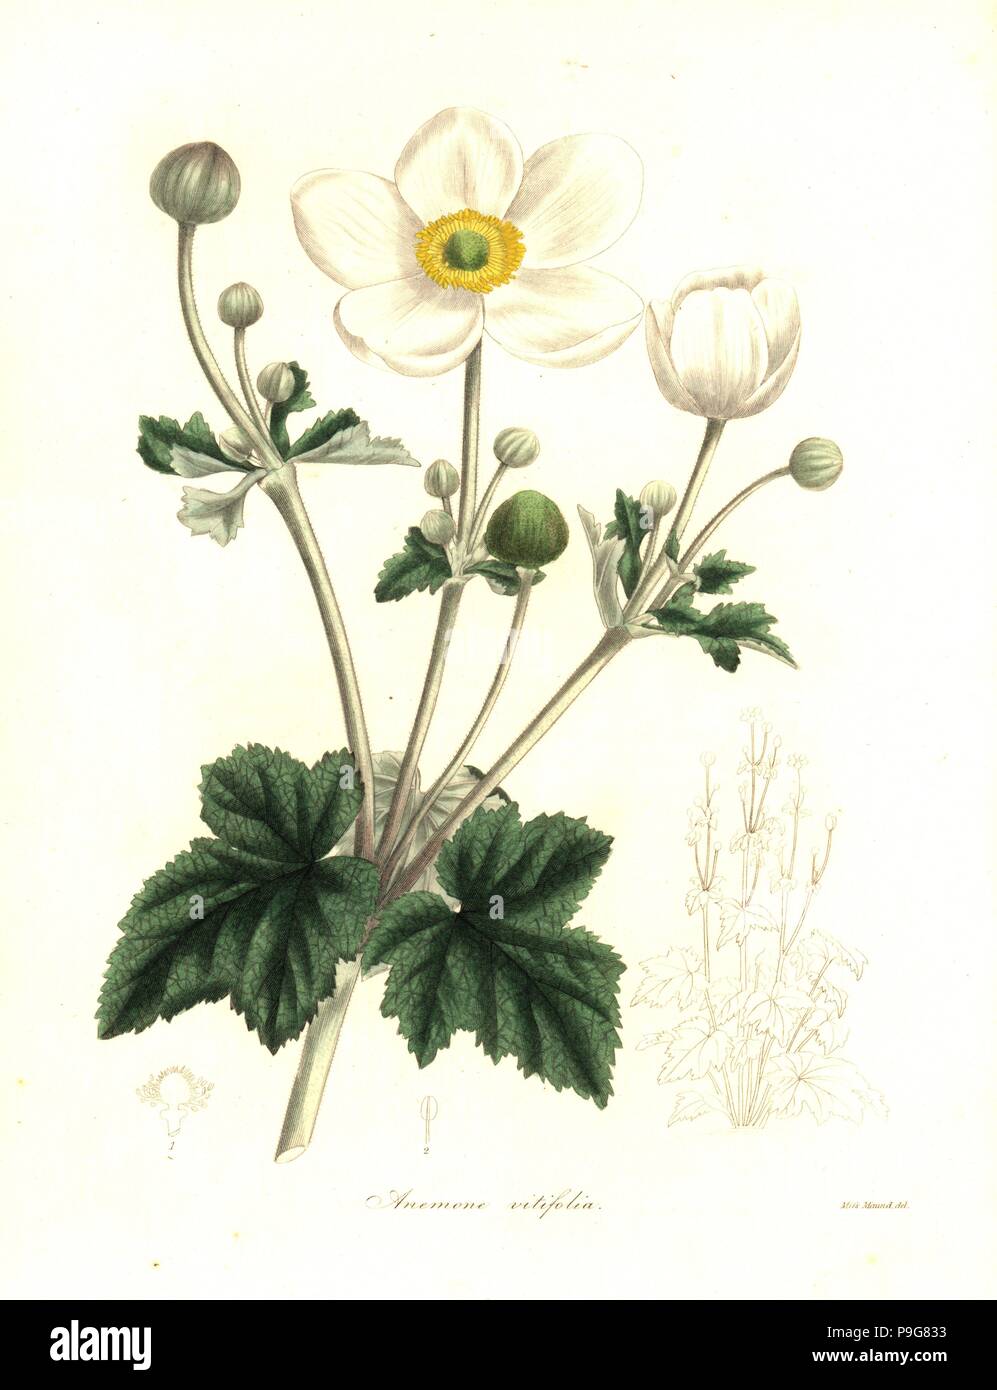 Vine-leaved anemone, Anemone vitifolia. Handcoloured copperplate engraving after a botanical illustration by Miss Maund from Benjamin Maund and the Rev. John Stevens Henslow's The Botanist, London, 1836. Stock Photo